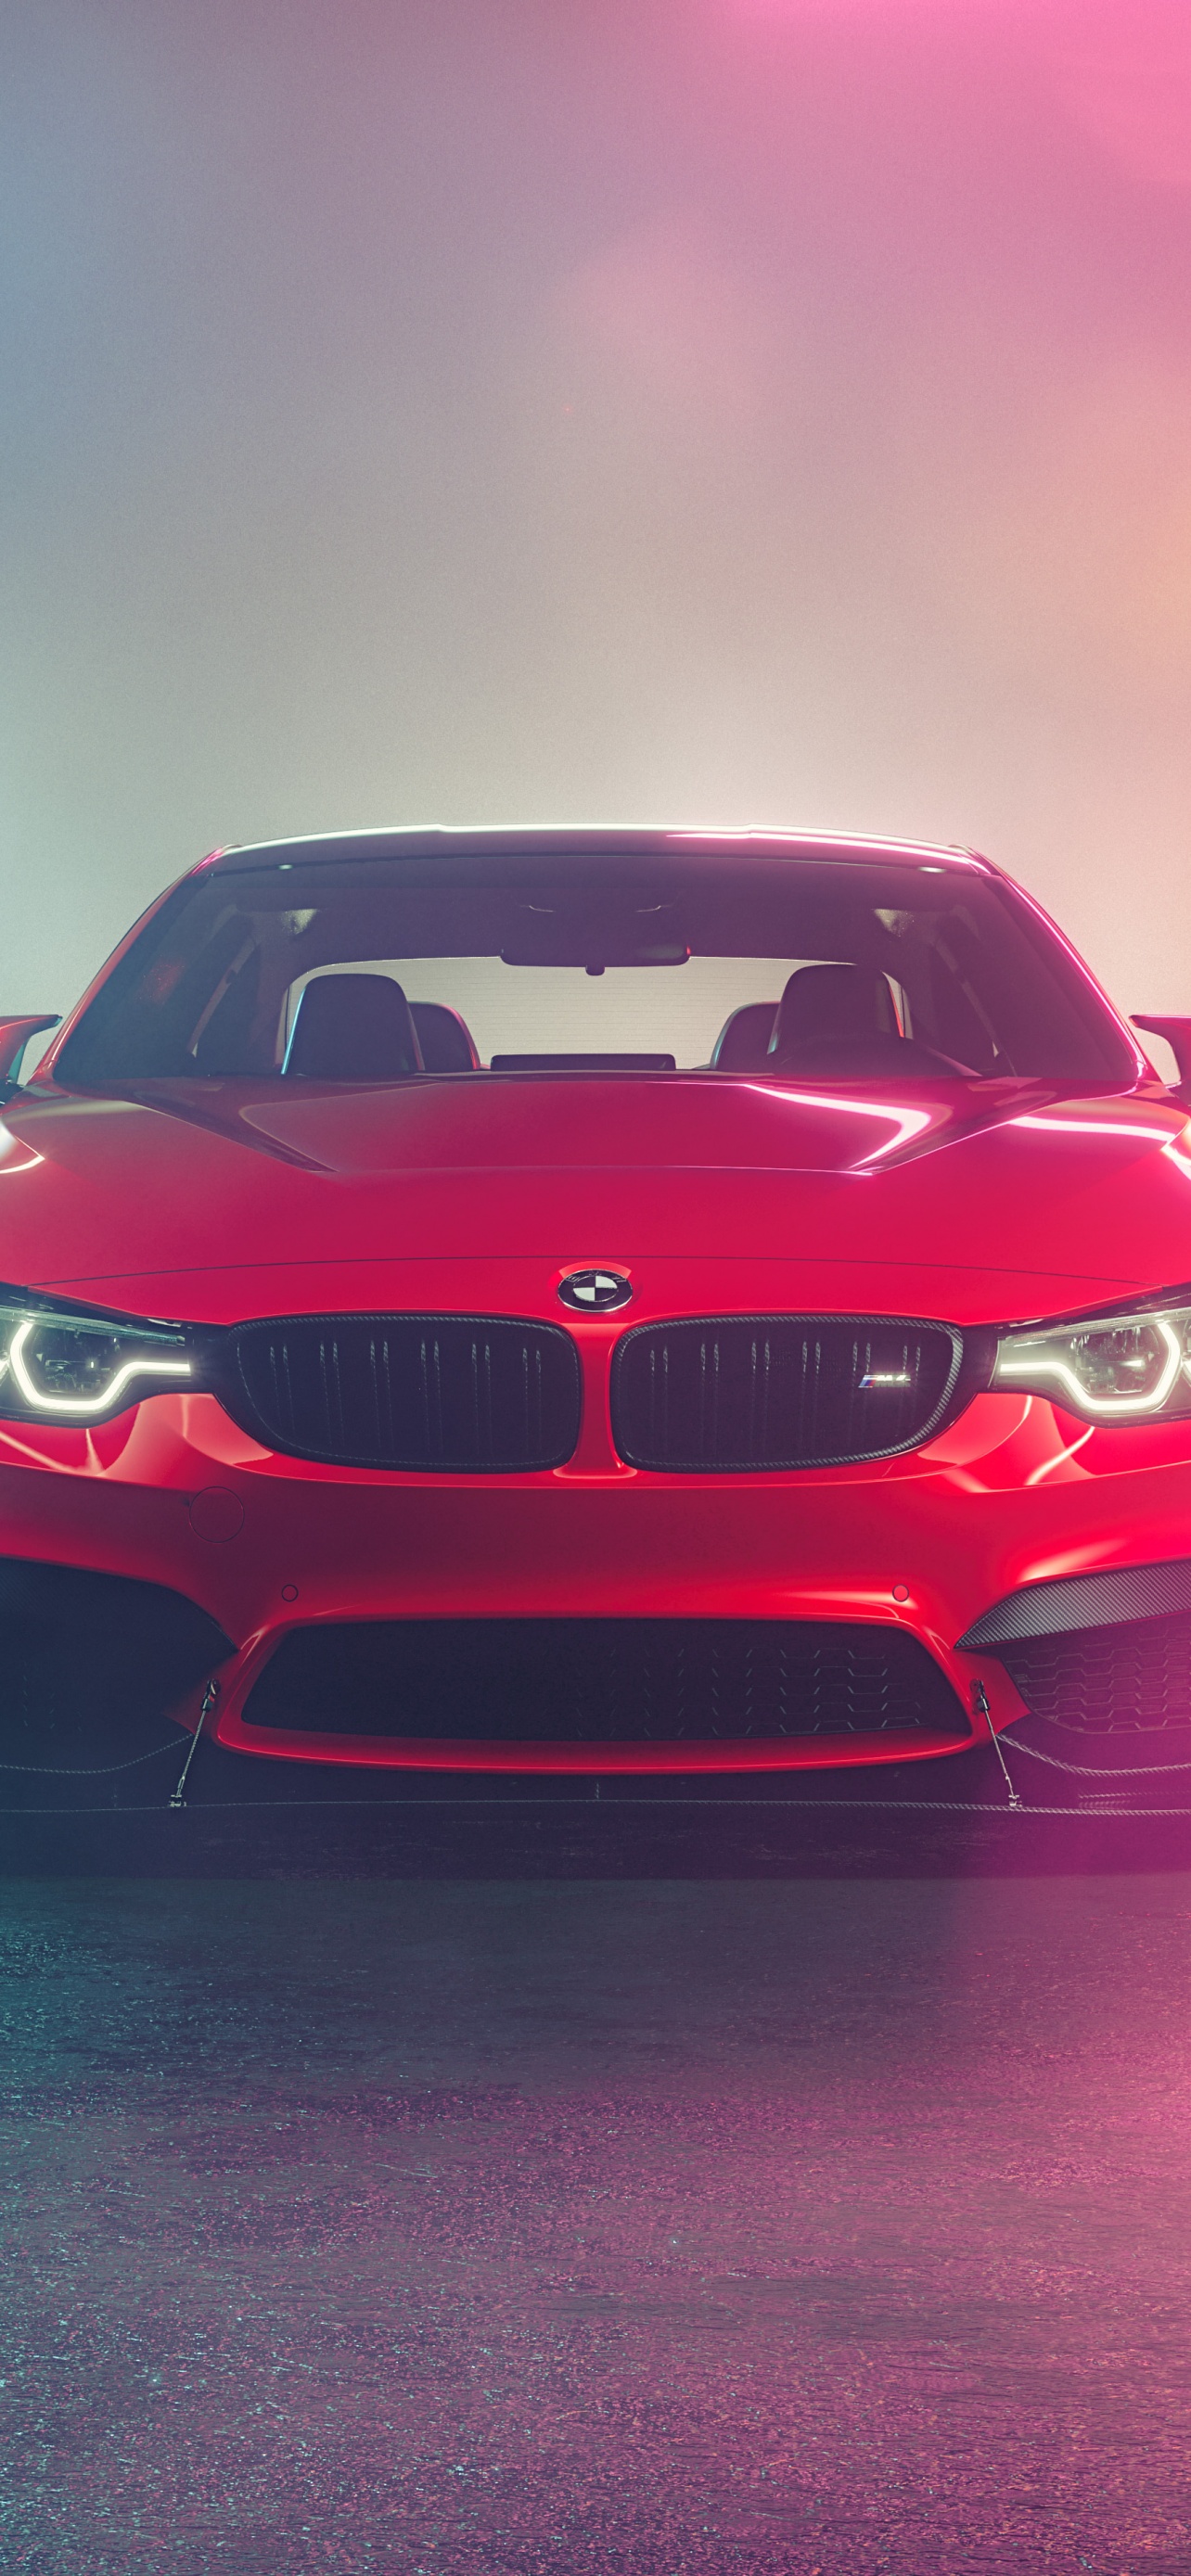 BMW iPhone X Wallpapers  Top Free BMW iPhone X Backgrounds   WallpaperAccess